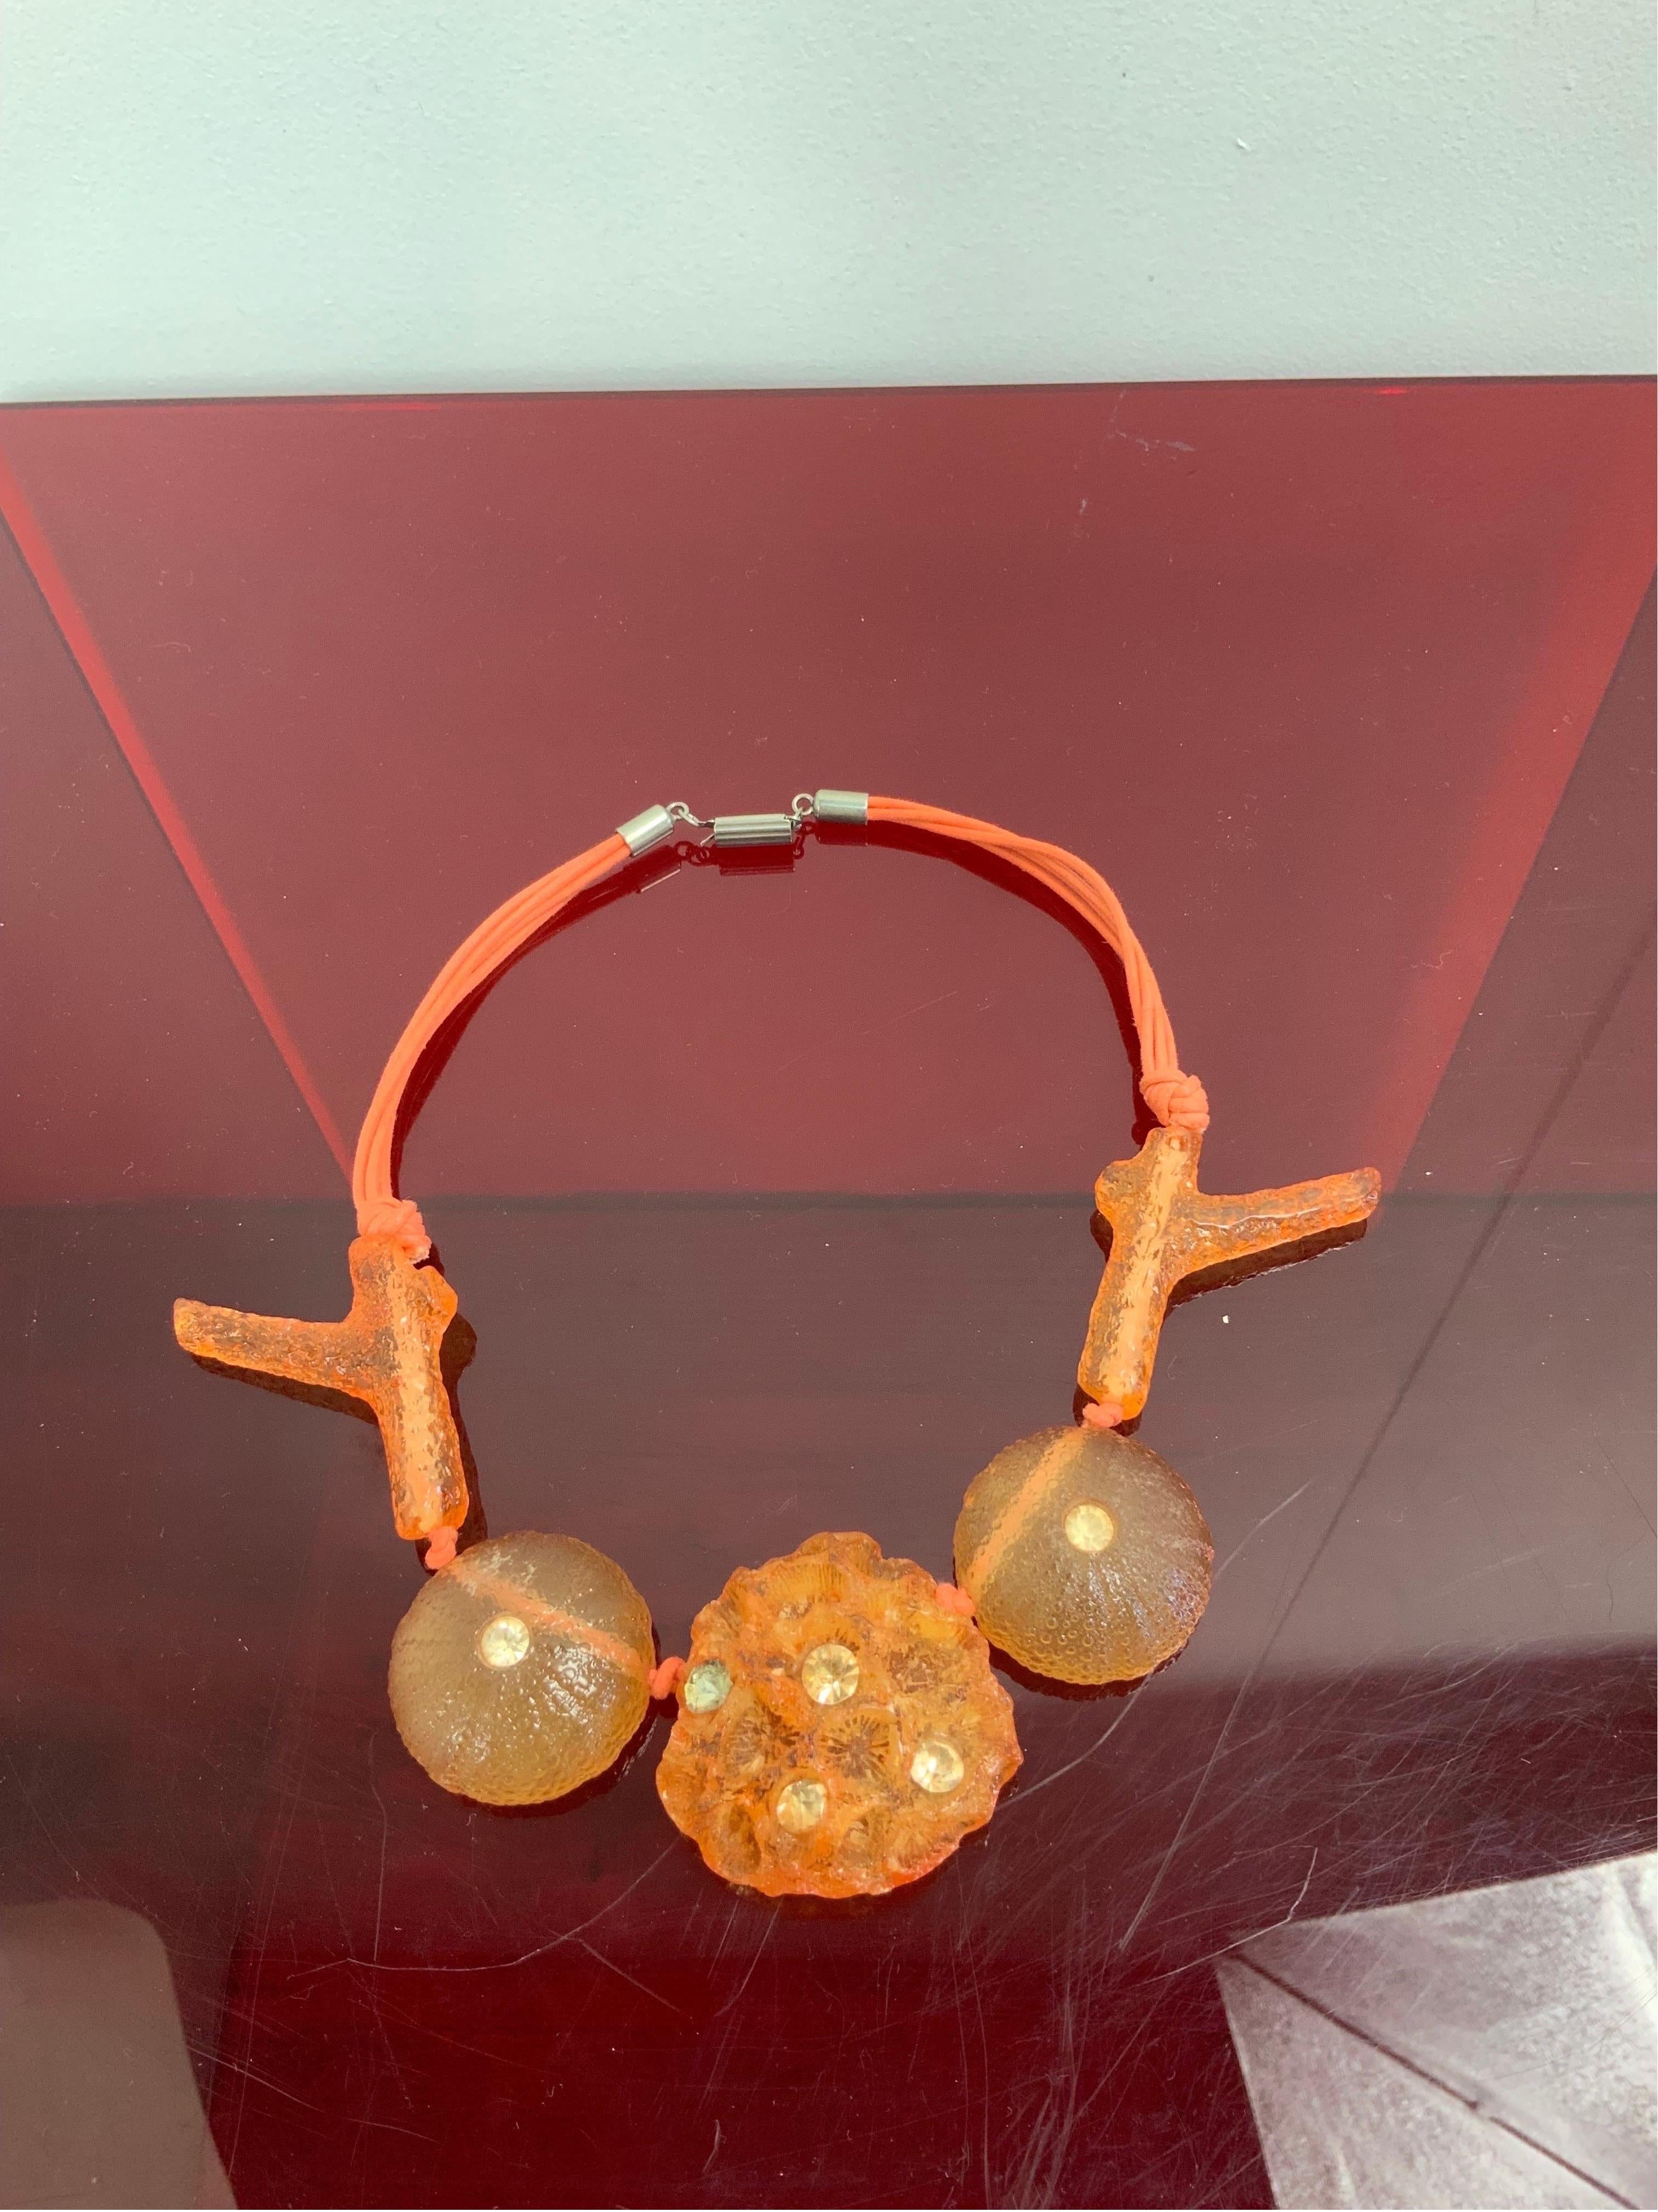 Ugo Correani necklace.
Famous Italian jewelry designer.
Marine theme
In orange resin and beads.
23 cm long.
In good general condition, it shows signs of normal use.